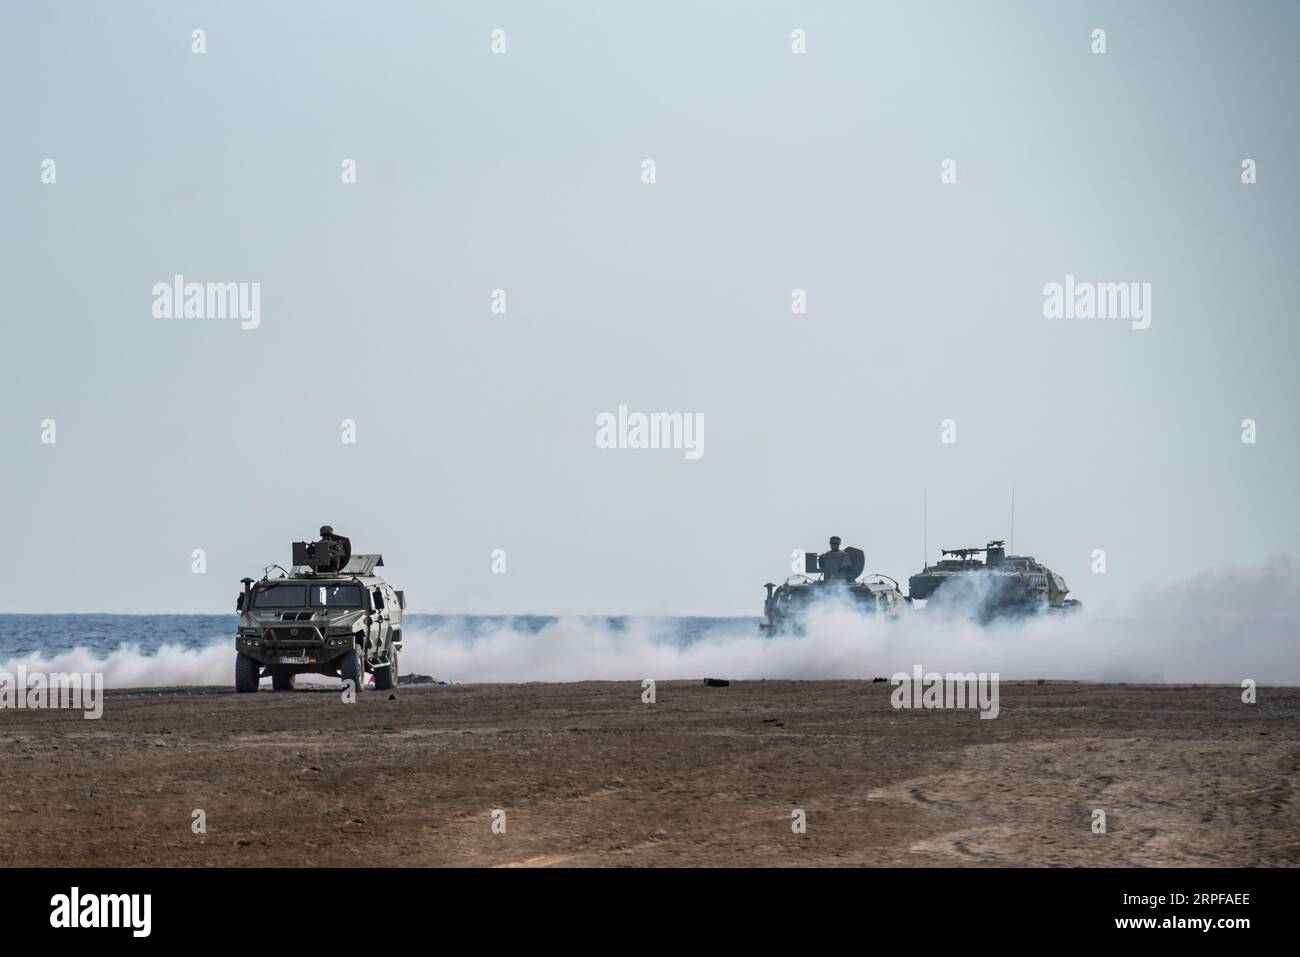 Battle tank, assault vehicles and soldiers under a smoke screen at the Armed Forces Day exhibition on Motril beach. Stock Photo